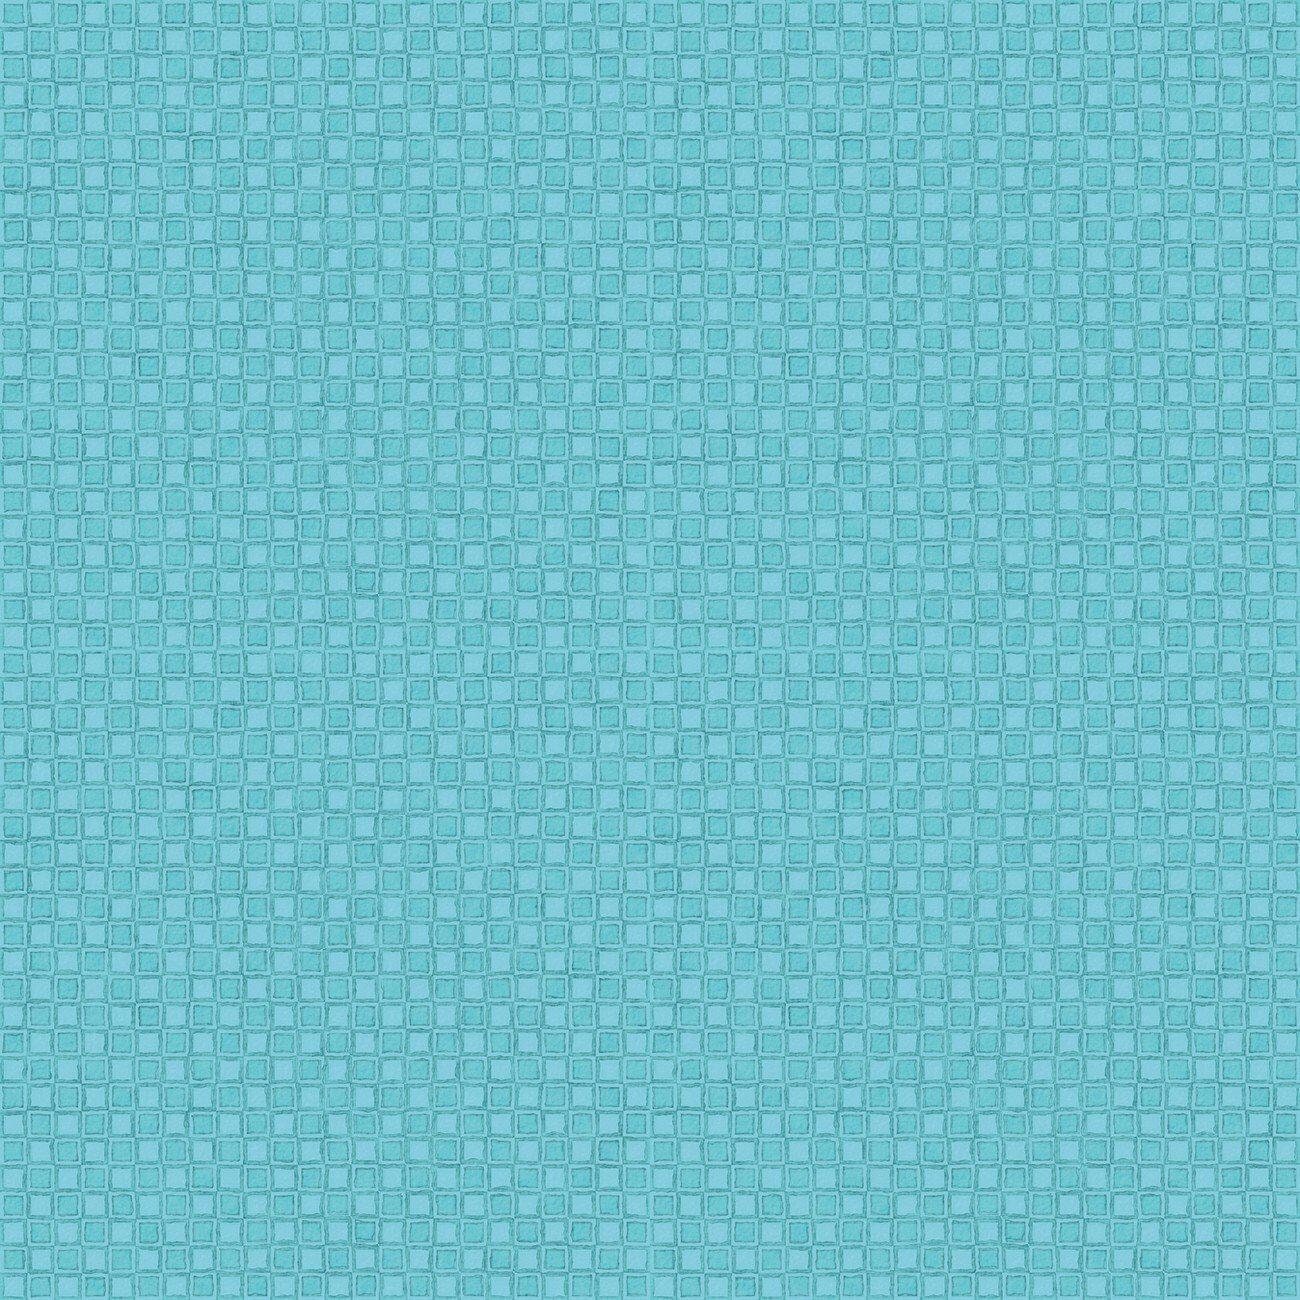 LAMINATED cotton fabric - Lucy June Blocks Aqua (sold continuous by the half yard) Food Safe Fabric, BPA free